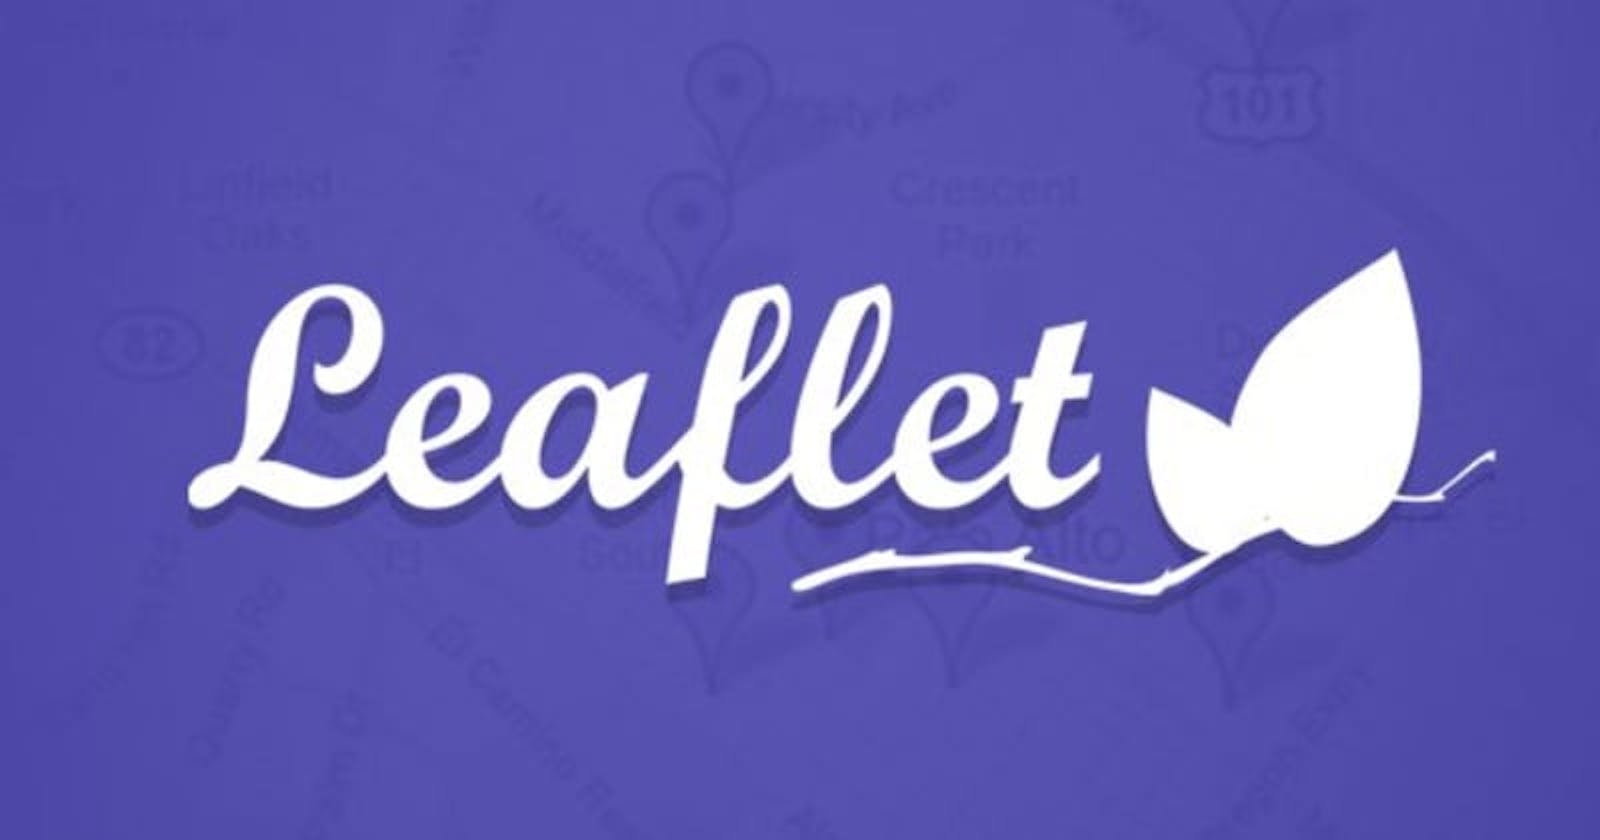 Getting Started with Leaflet